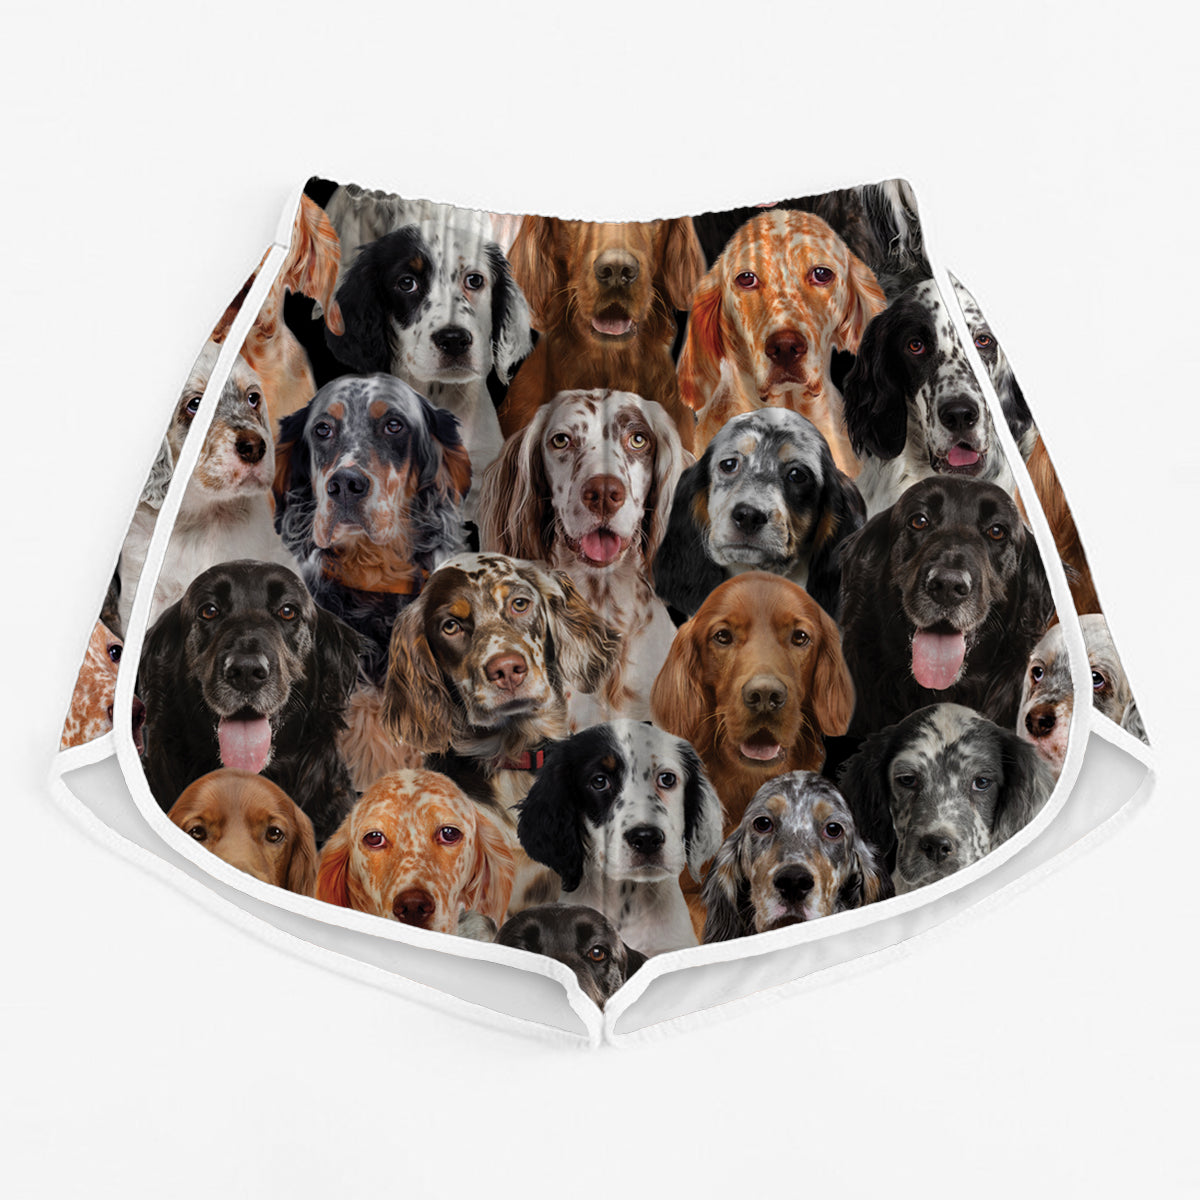 You Will Have A Bunch Of English Setters - Women's Running Shorts V1